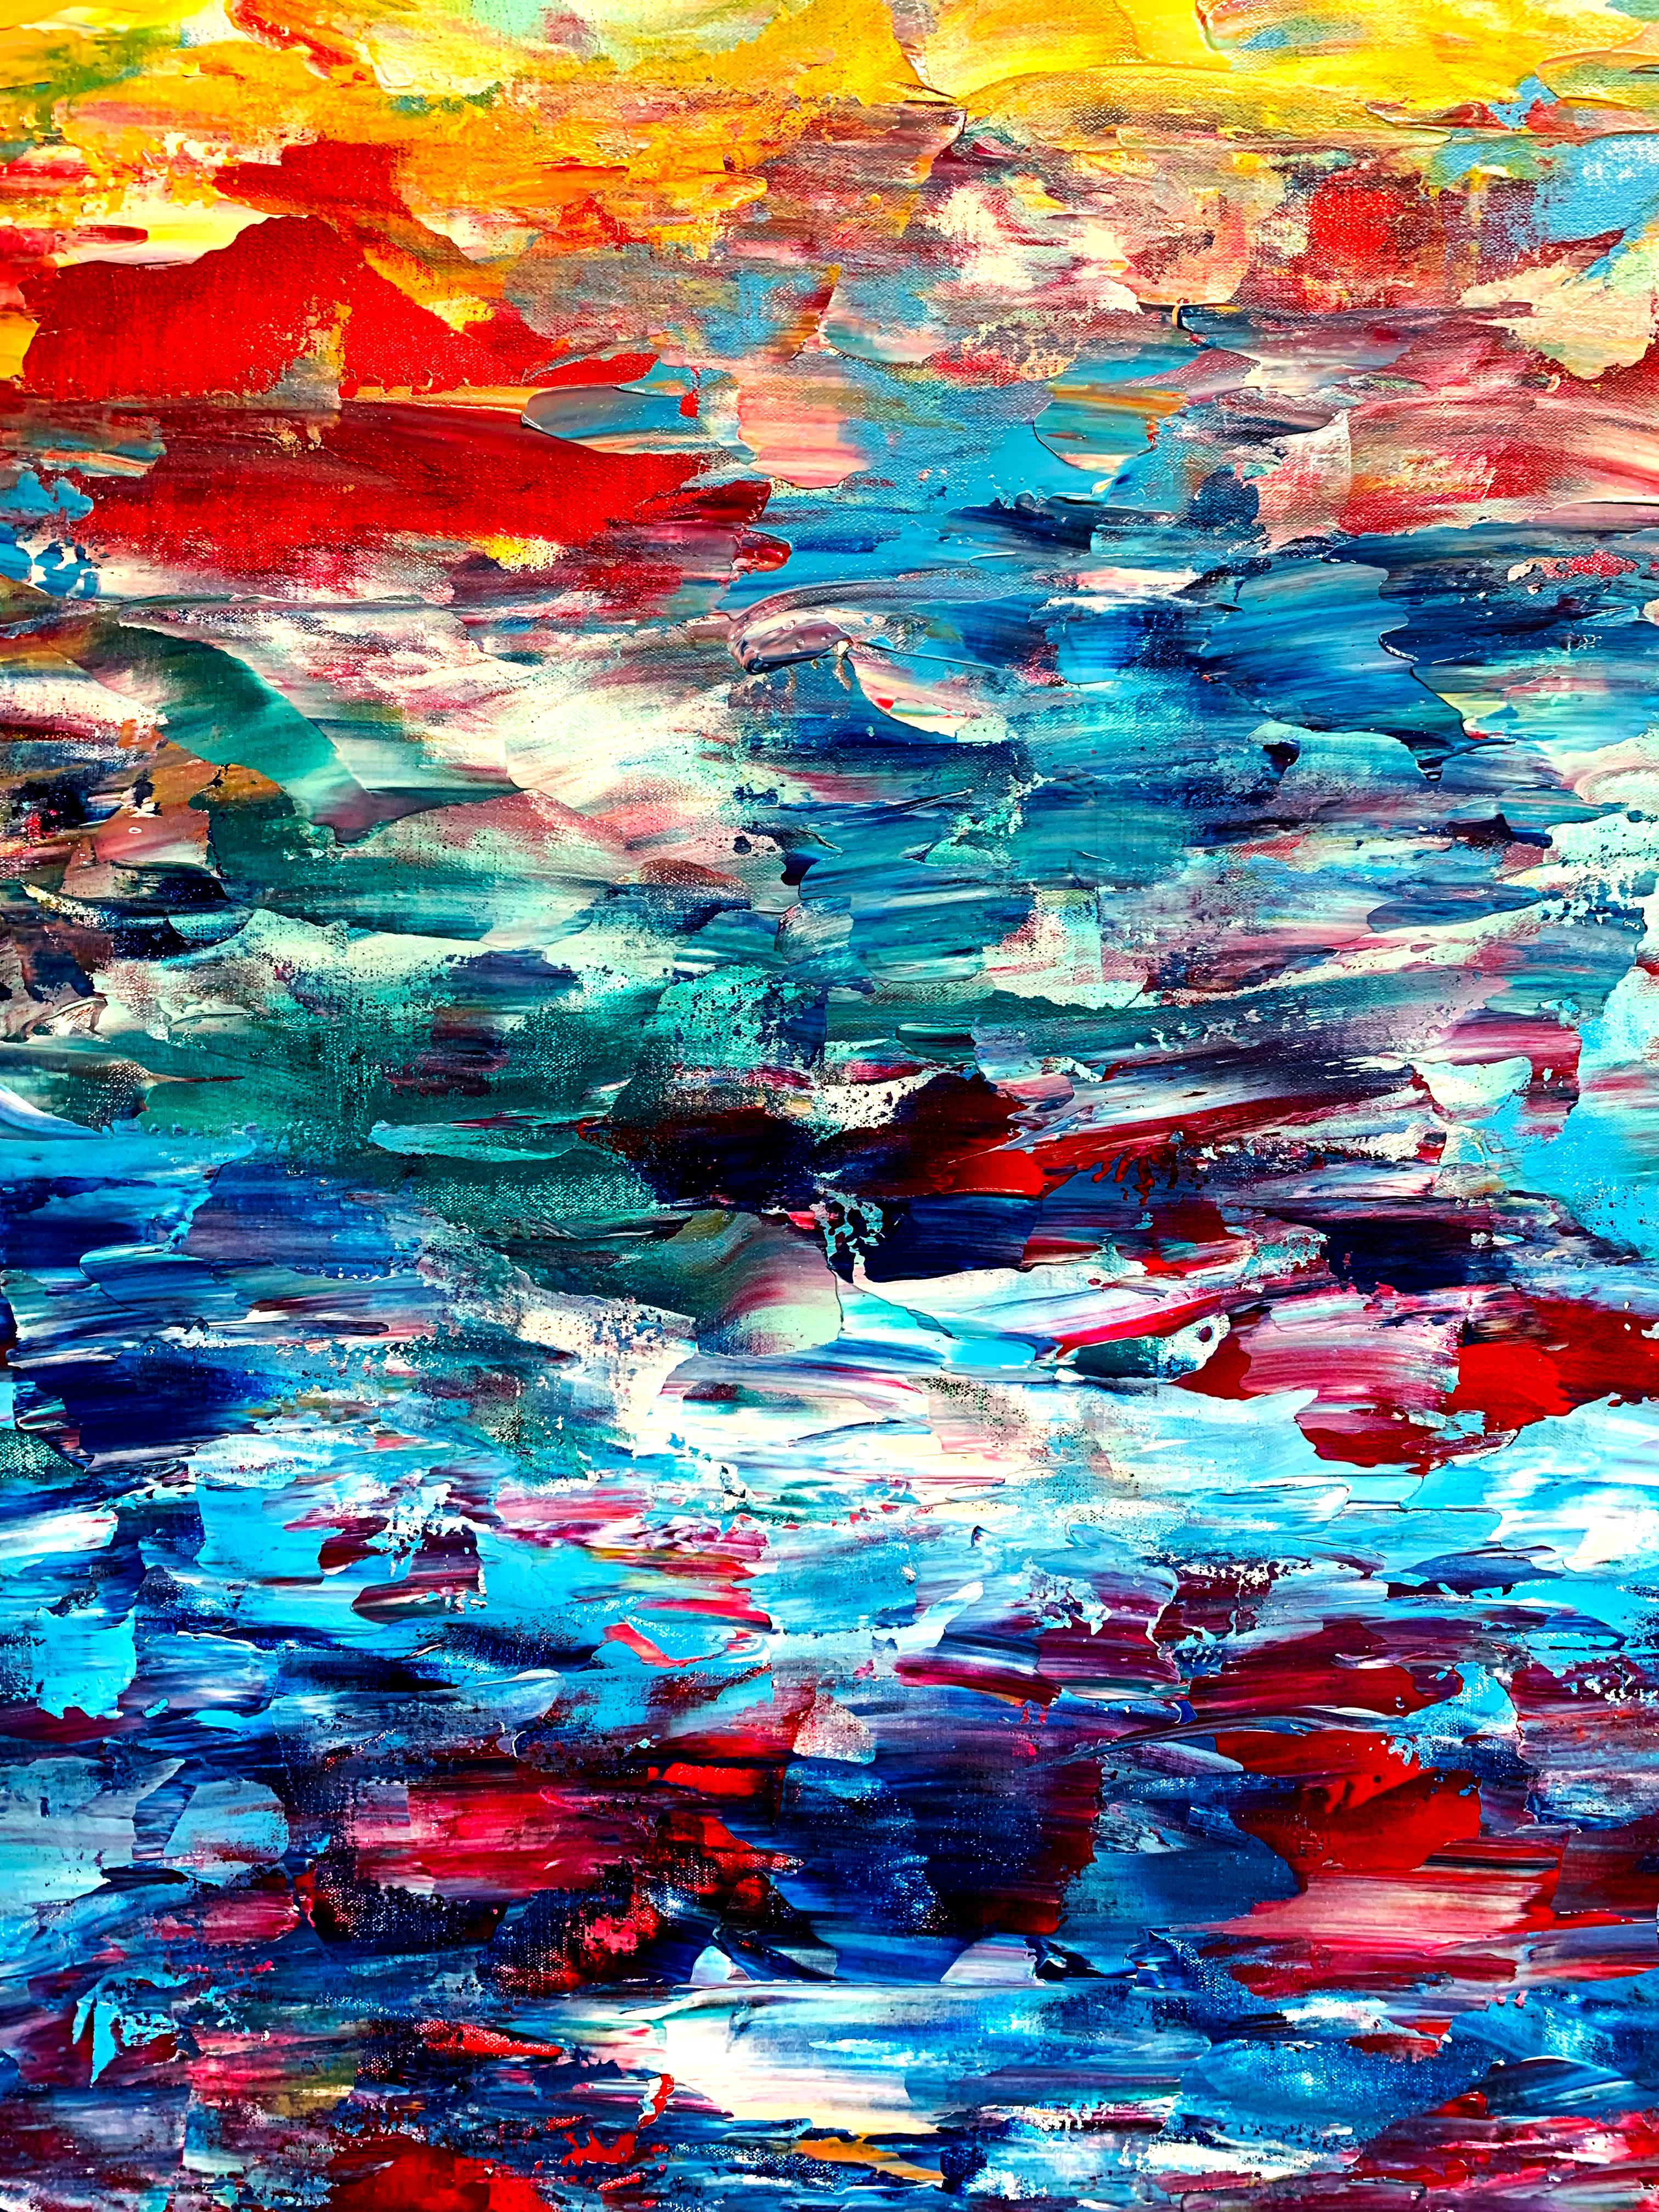 Reflections of a Lake - Abstract Expressionist Painting by Estelle Asmodelle